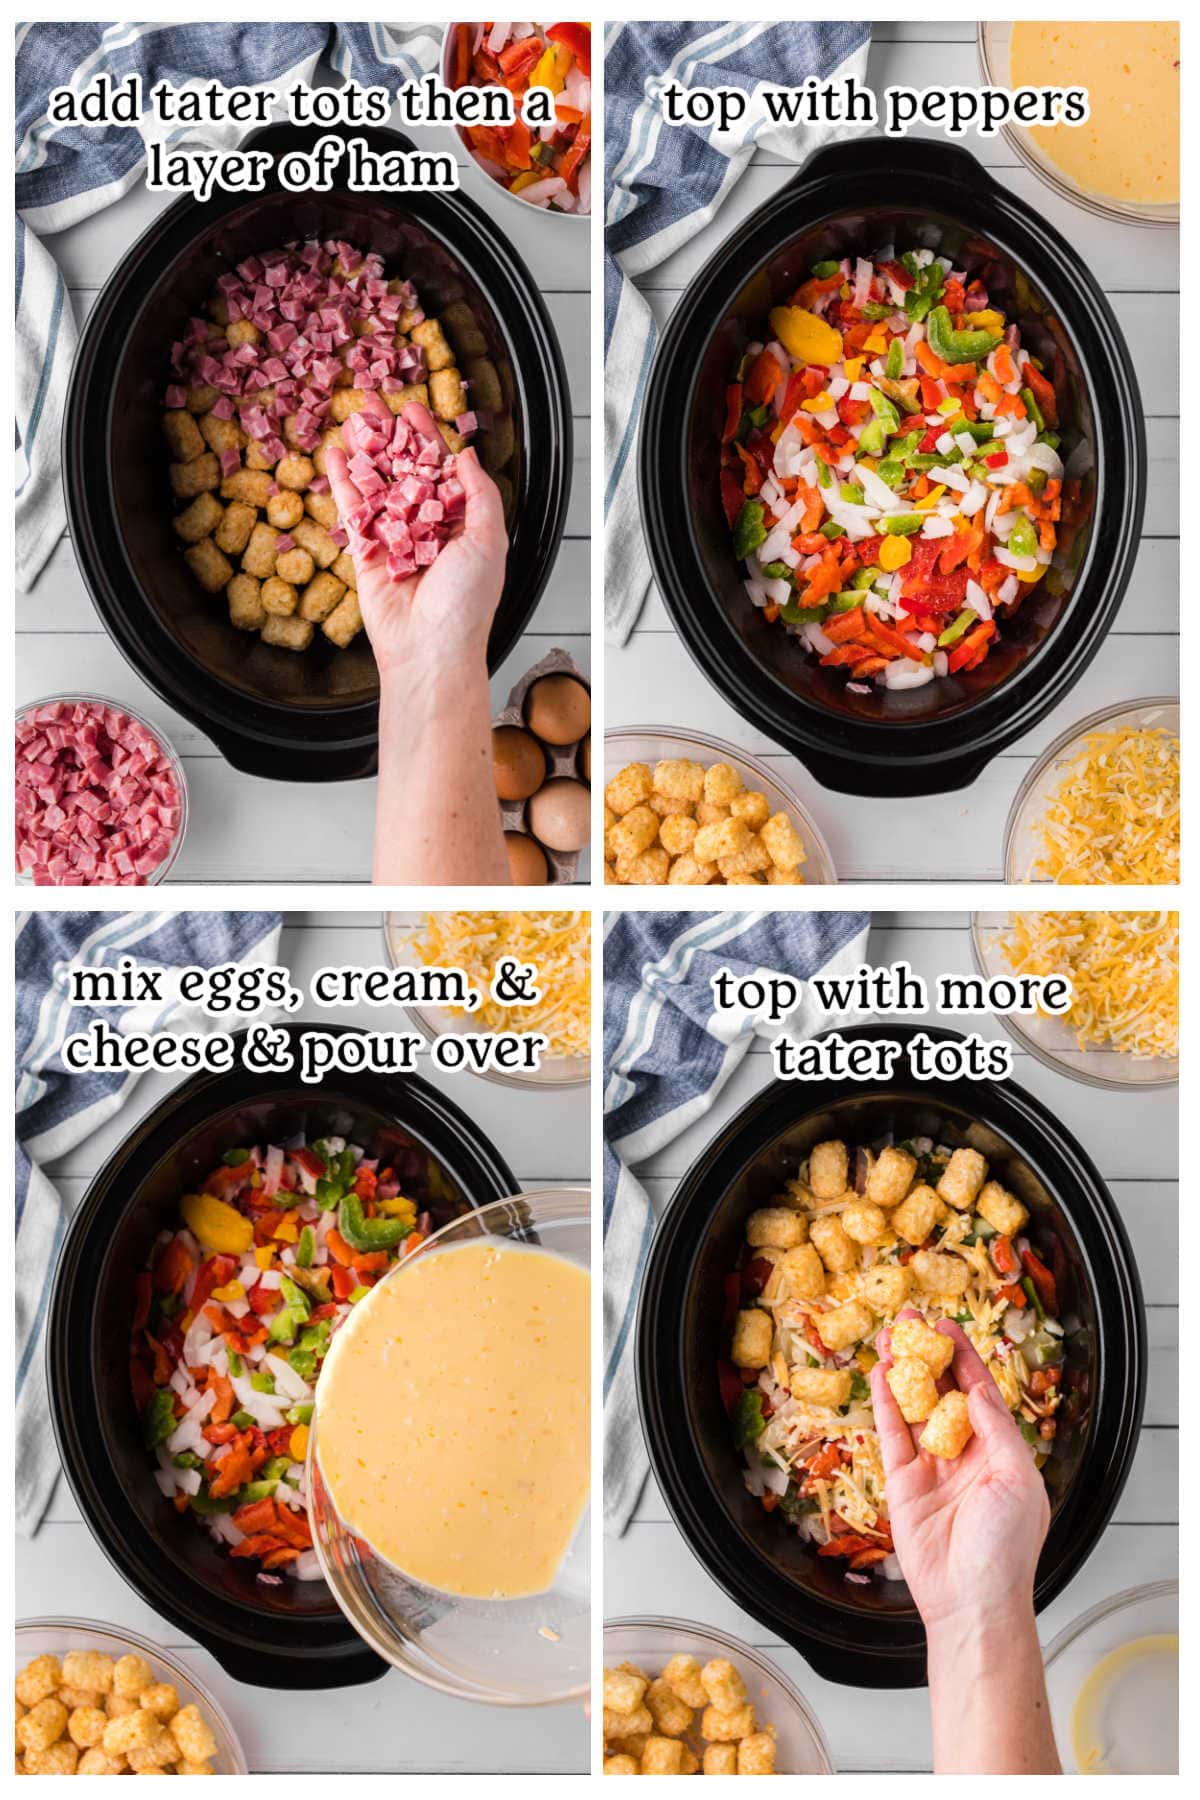 Four overhead images of a crockpot and ingredients with text overlay highlighting the main recipe steps.